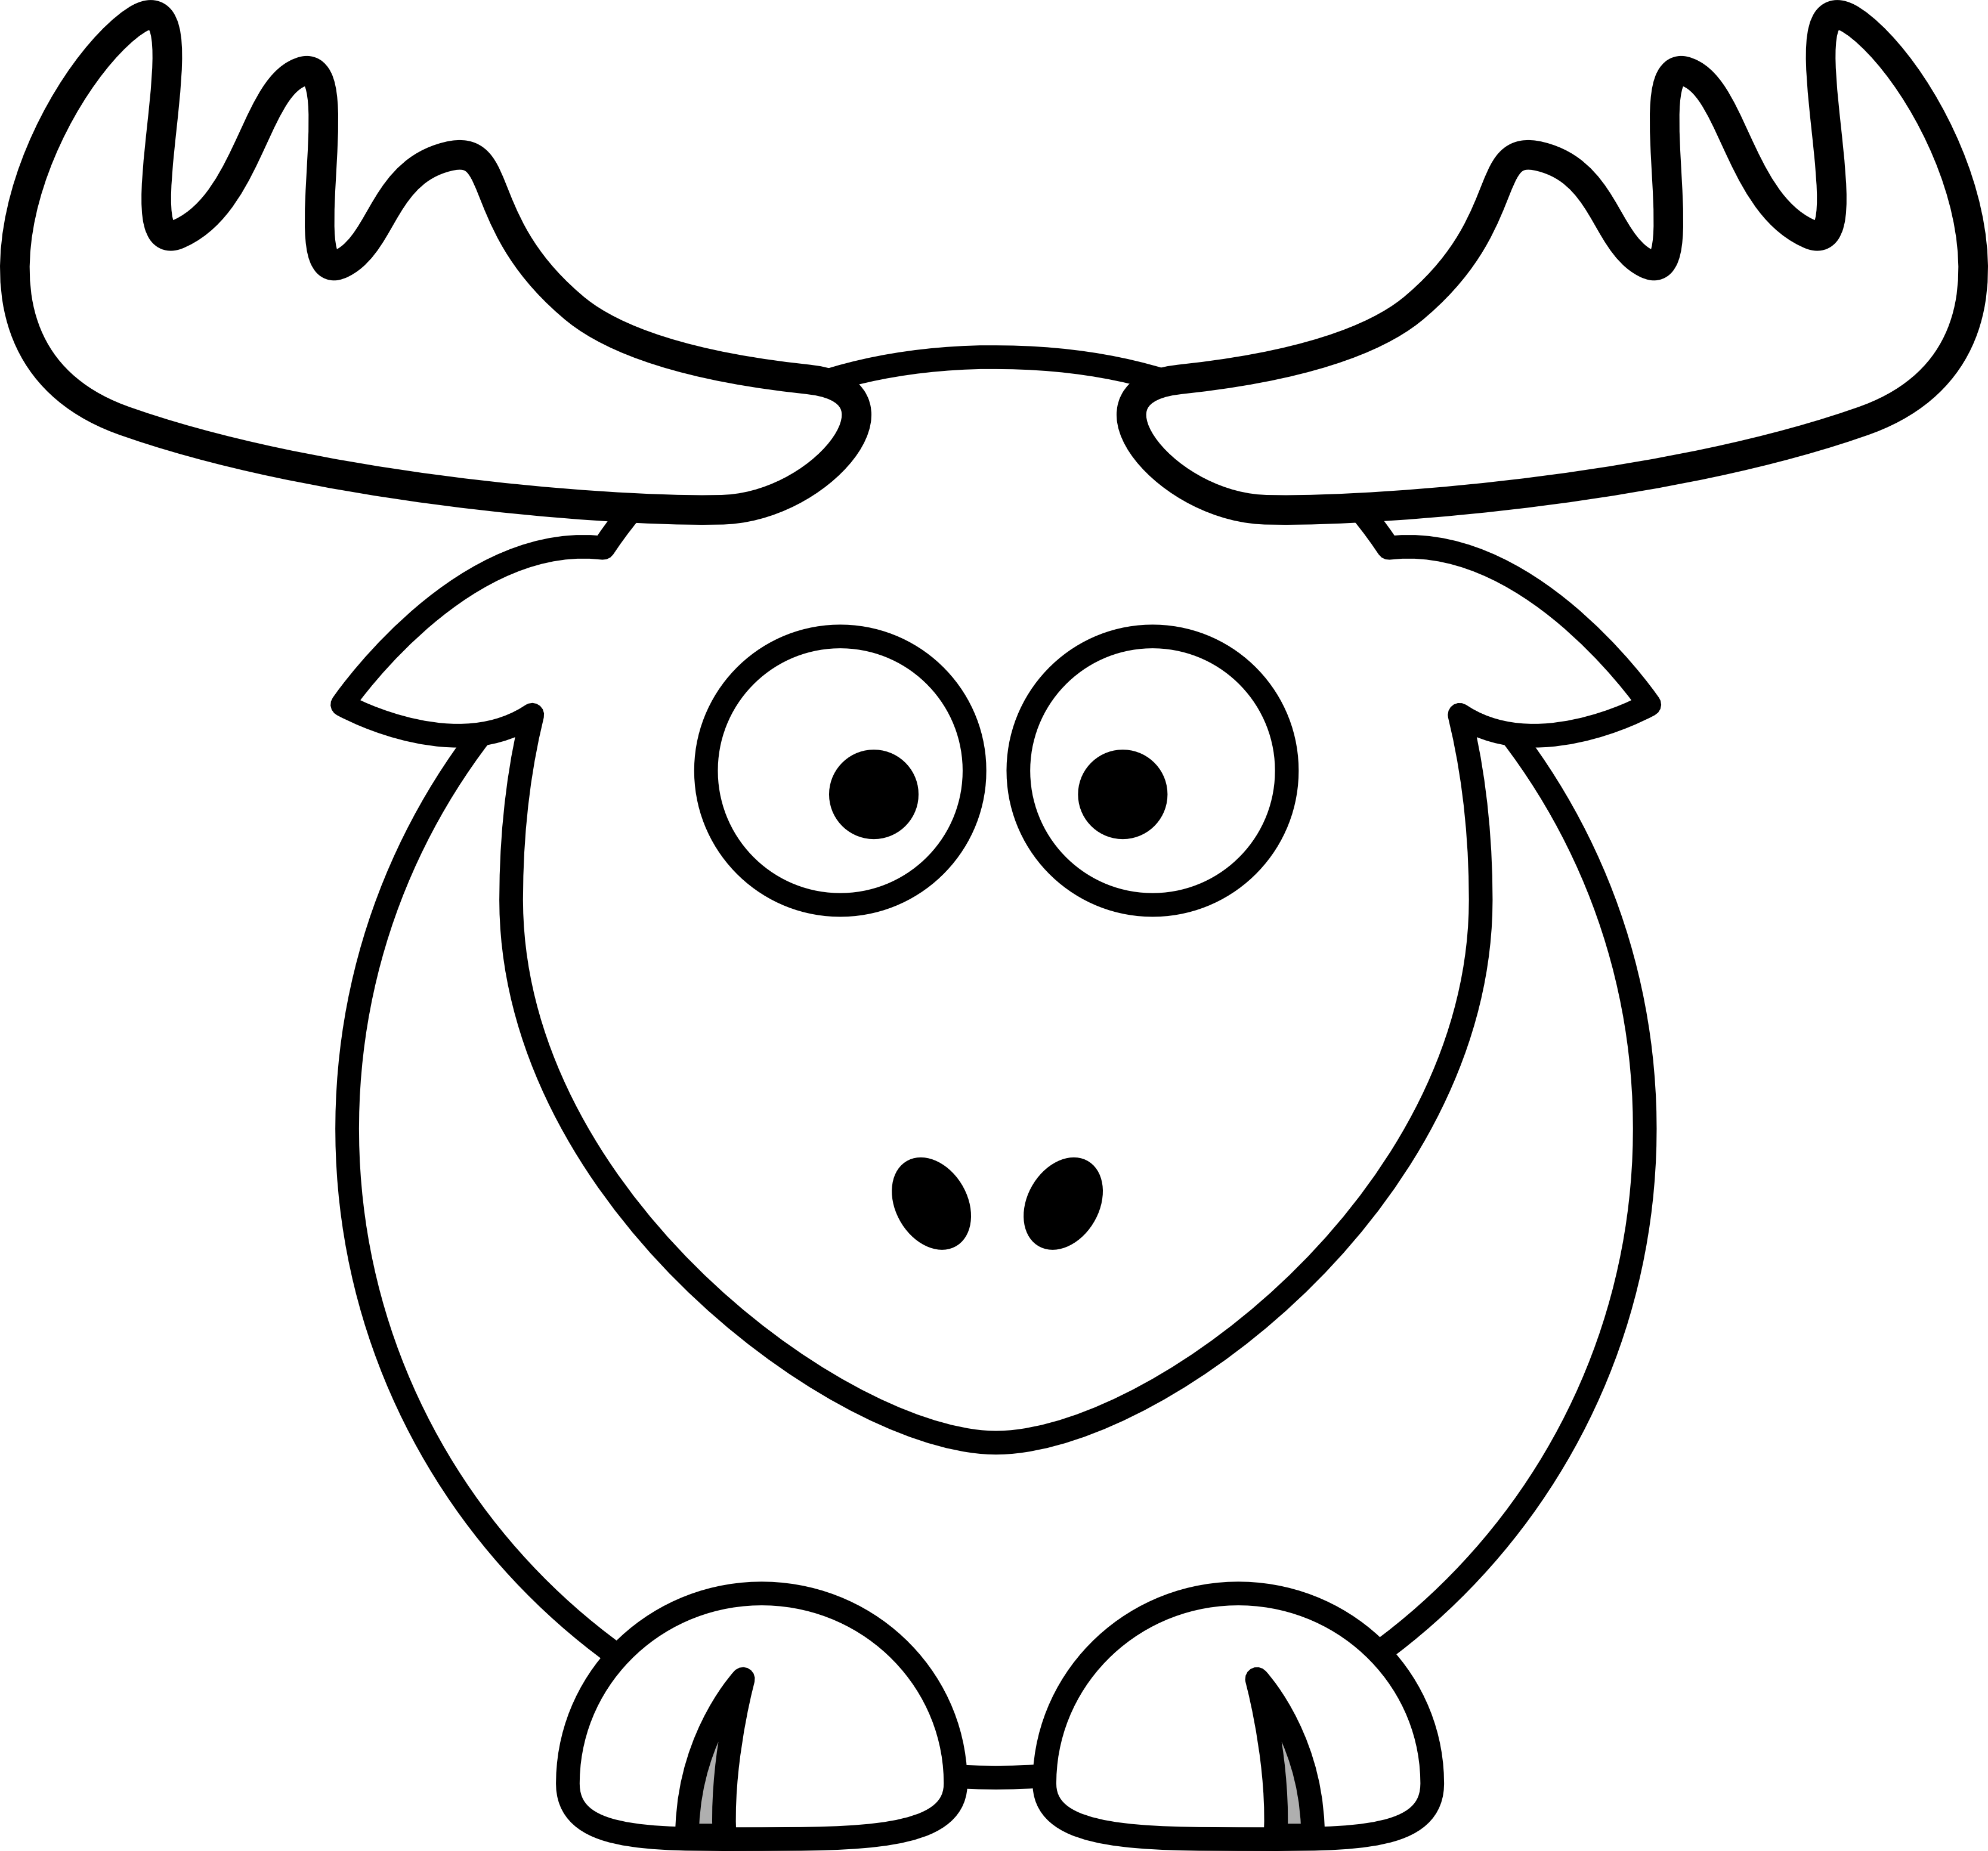  collection of drawing. Elk clipart cartoon